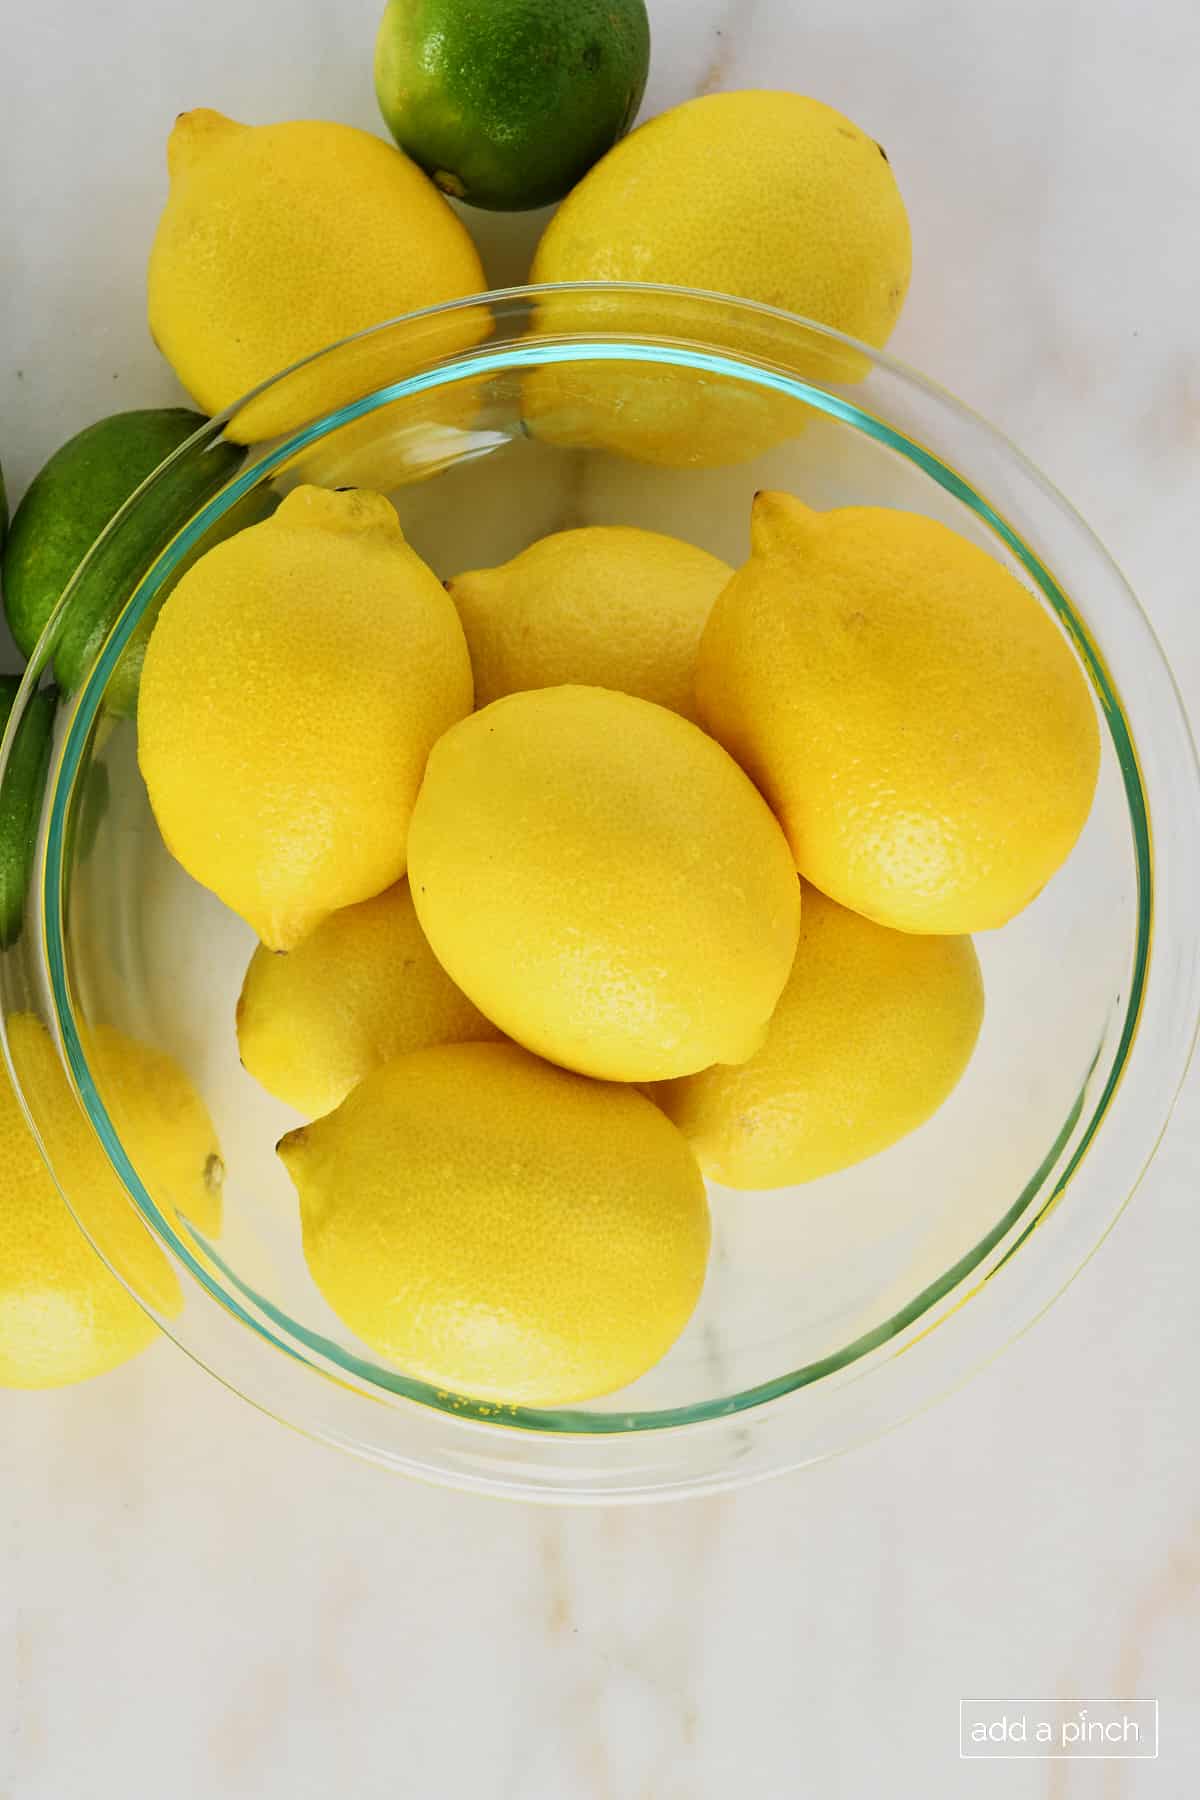 glass mixing bowl filled with yellow lemons and a few limes on the side of the bowl set on a marble surface.